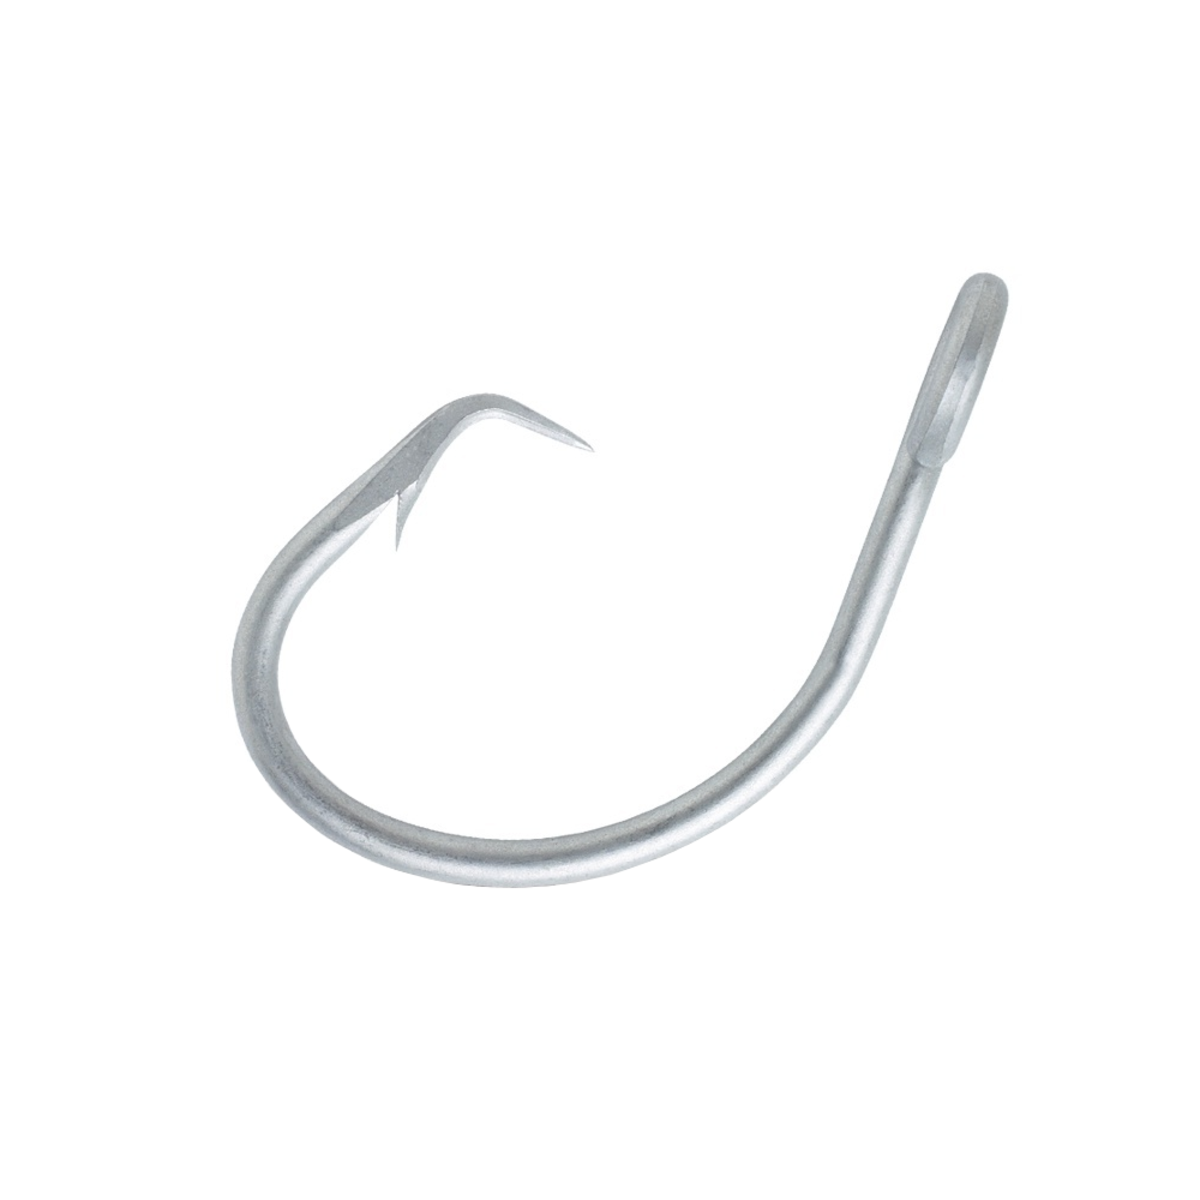 https://www.smartmarine.co.nz/cdn/images/products/xlarge/8071662_circle_hook.png